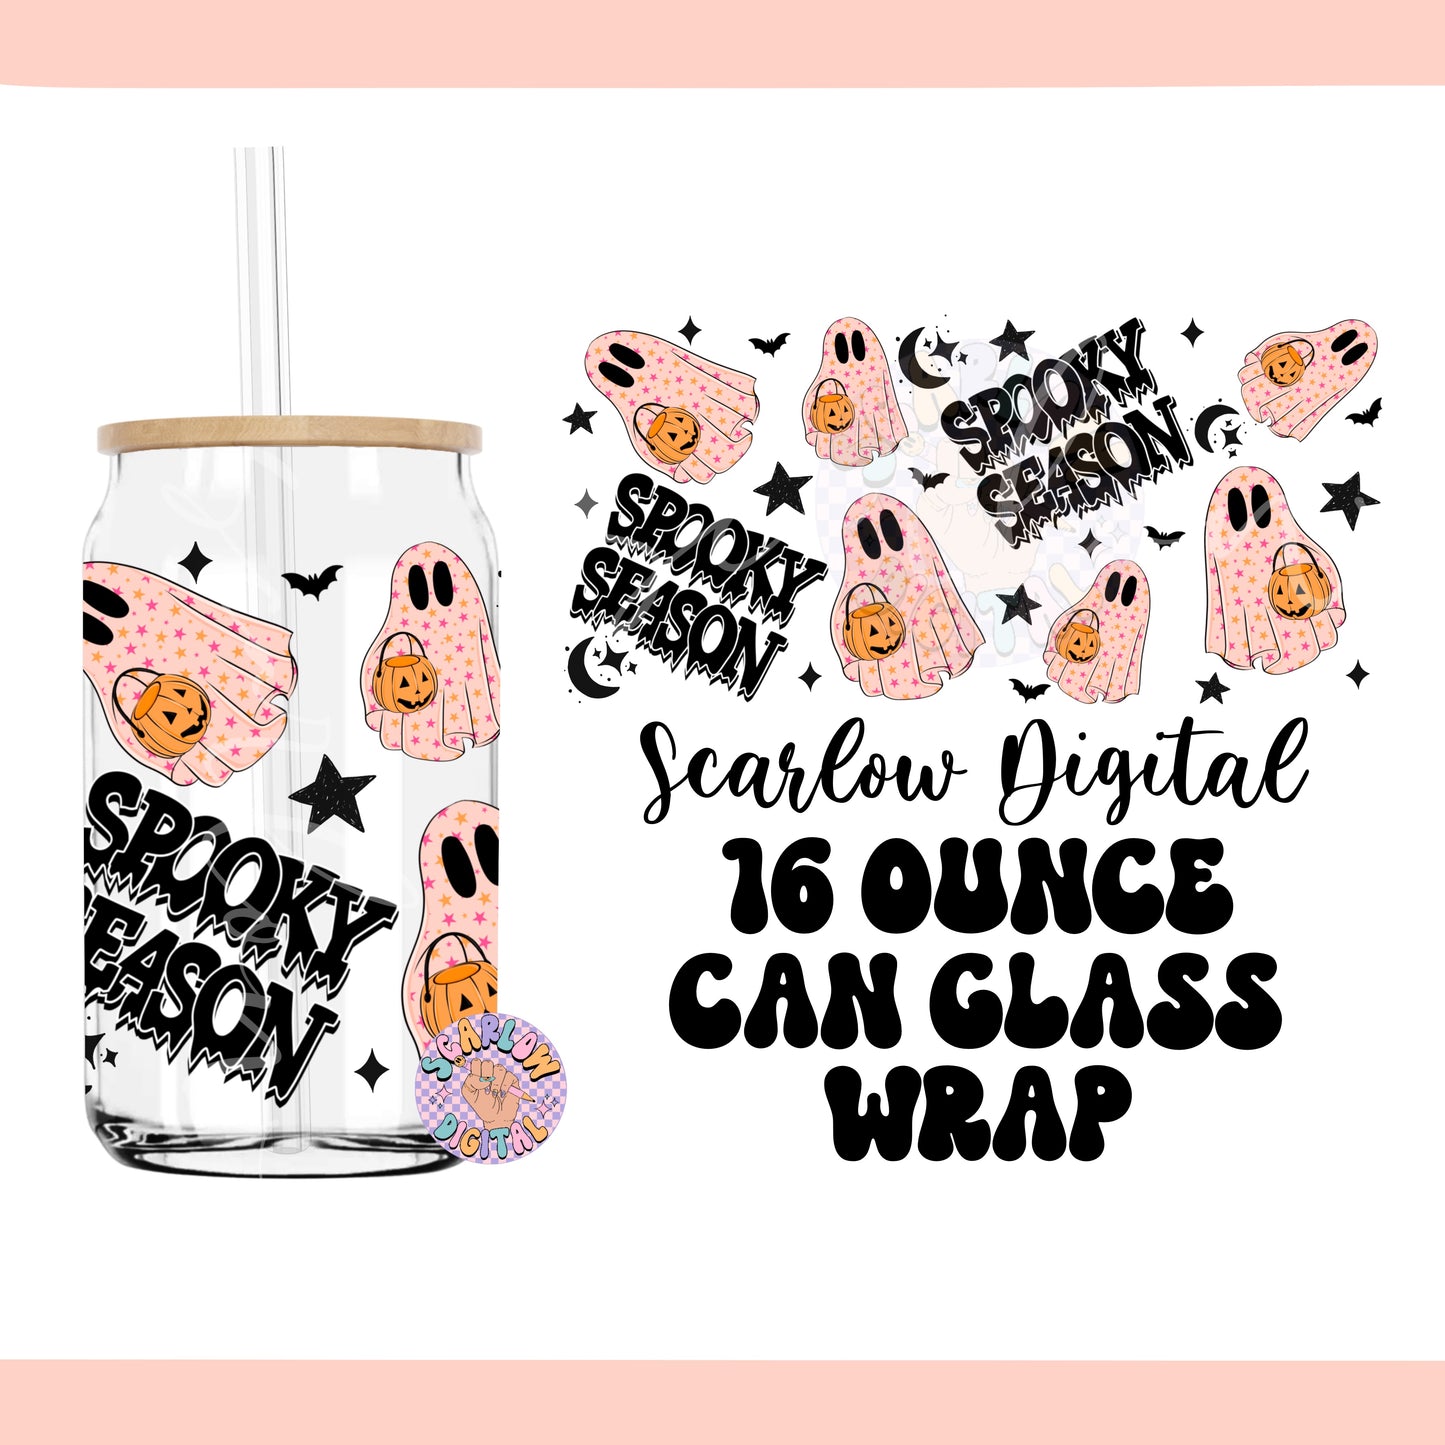 Ghost Glass Can Wrap PNG-Halloween 16 oz. Can Glass Sublimation Digital Design Download-spooky can glass png, fall cup wraps png designs